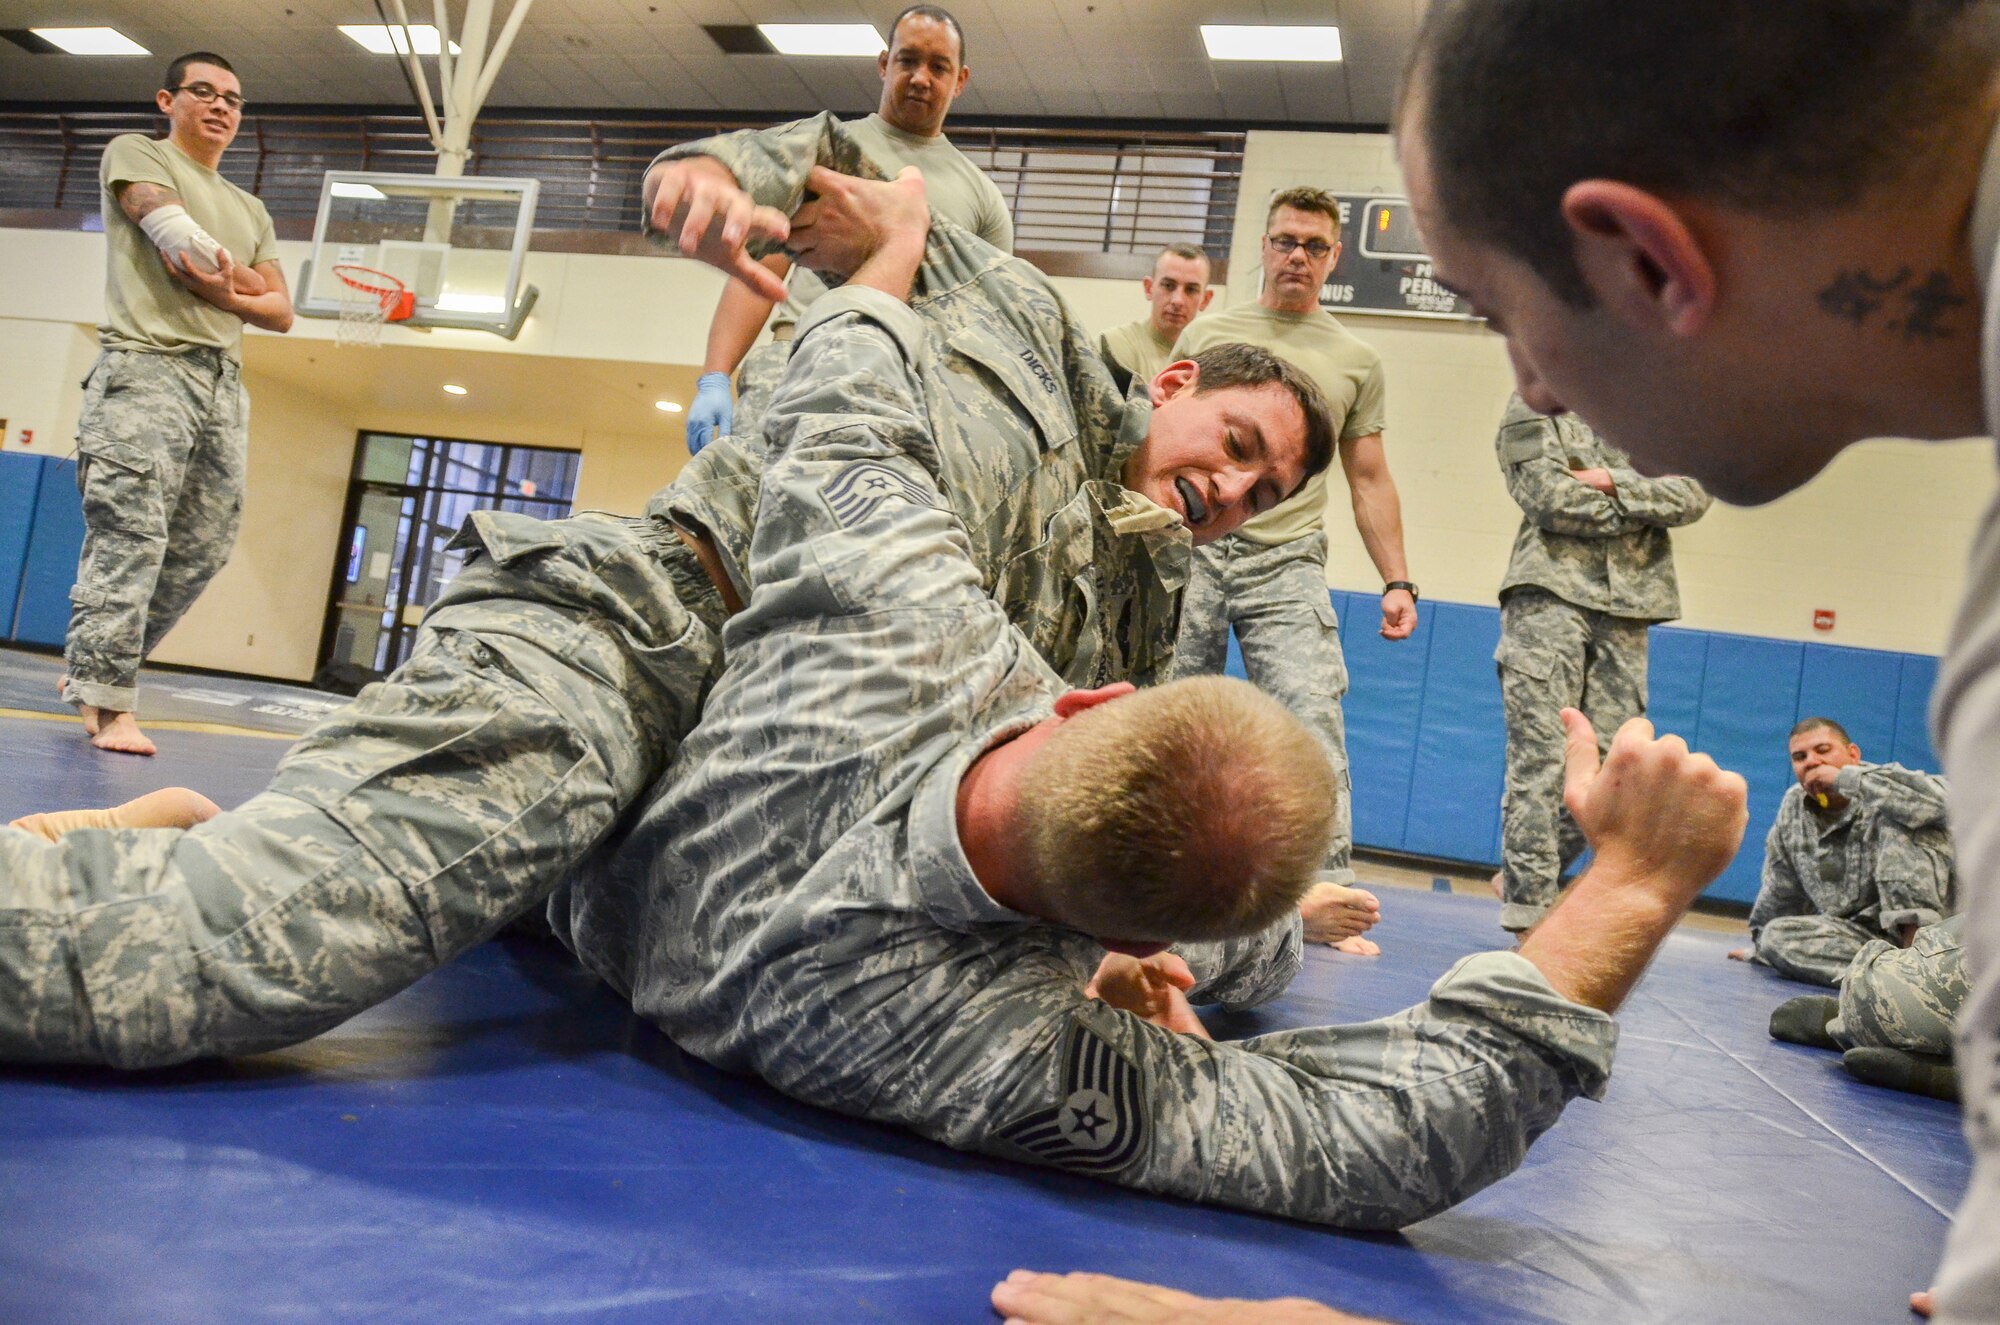 Capt. Brian Dicks, 55th Rescue Squadron, attempts to gain a dominant position on Tech Sgt. Joshua Holliday, 612th Air and Space Operations Center, during the Modern Army Combatives Program (MACP) Basic Combatives Course Level 1 at Davis-Monthan Air Force Base, Ariz., Jan. 16, 2014. The 40-hour course focuses on the three phases of basic fighting strategy; close the distance, gain the dominate position, and how to finish the fight. (U.S. Air Force photo by Staff Sgt. Adam Grant/Released)